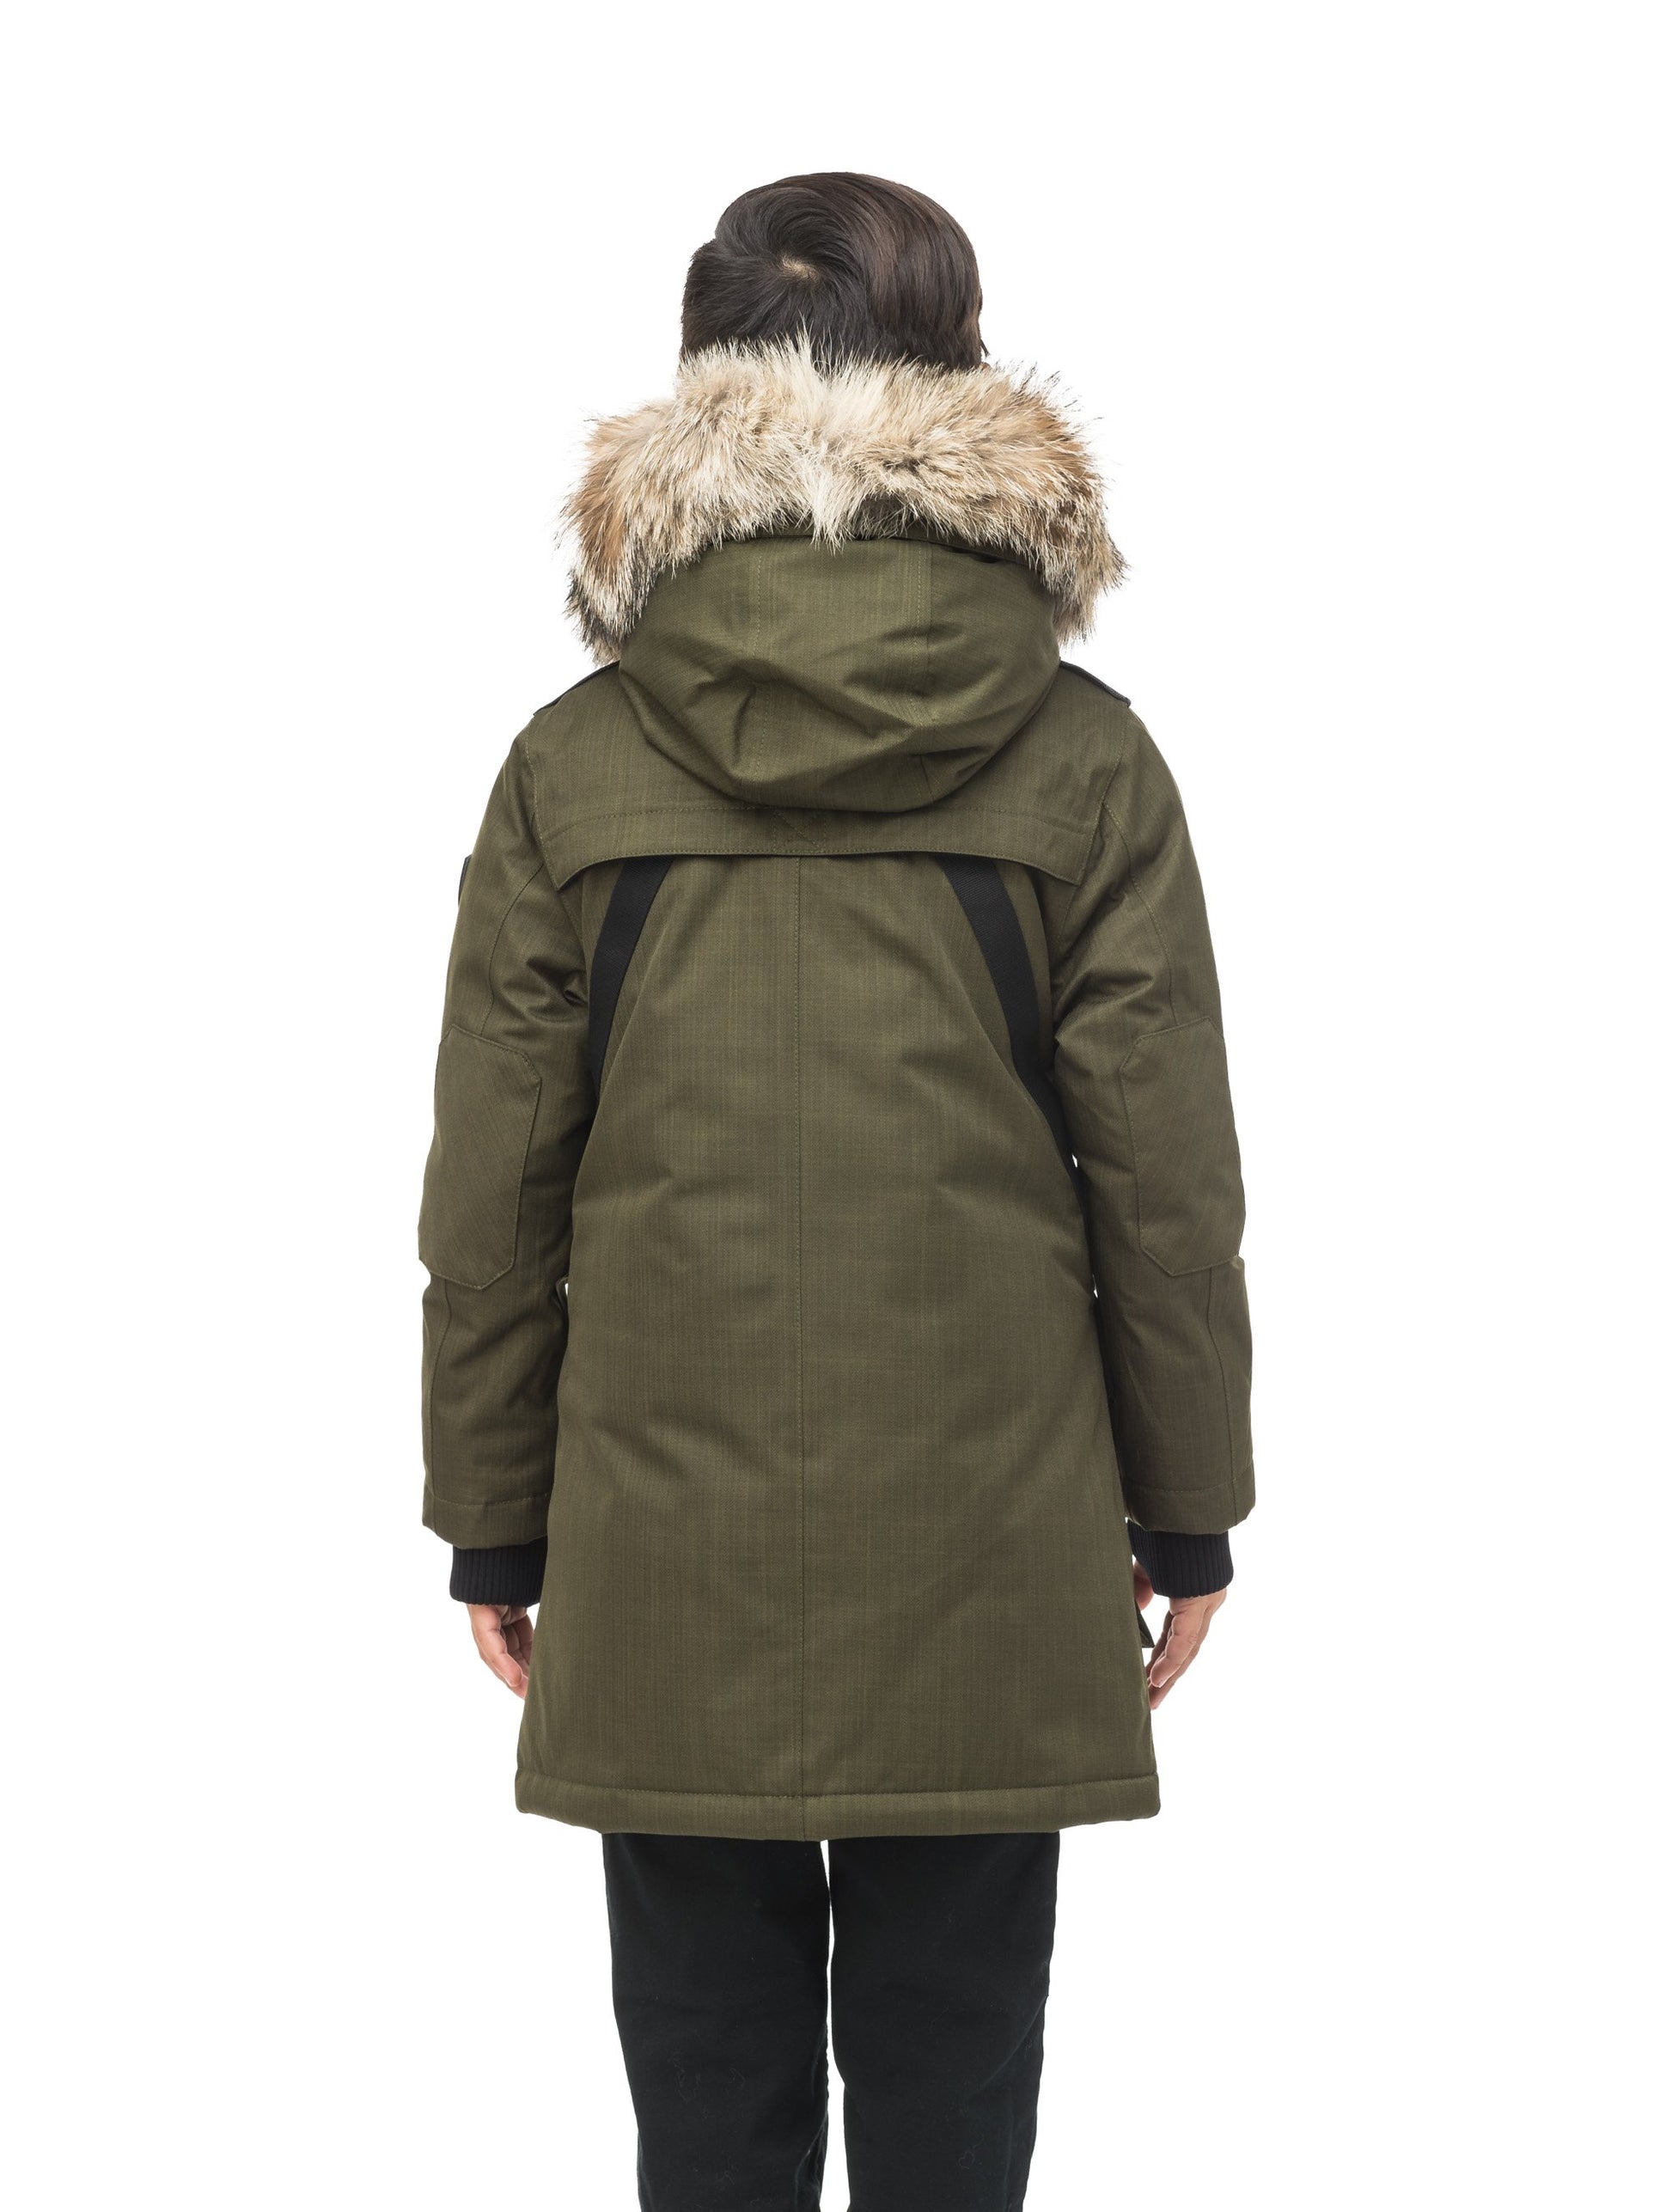 The best kid's down filled parka that's machine washable, waterproof, windproof and breathable in CH Fatigue